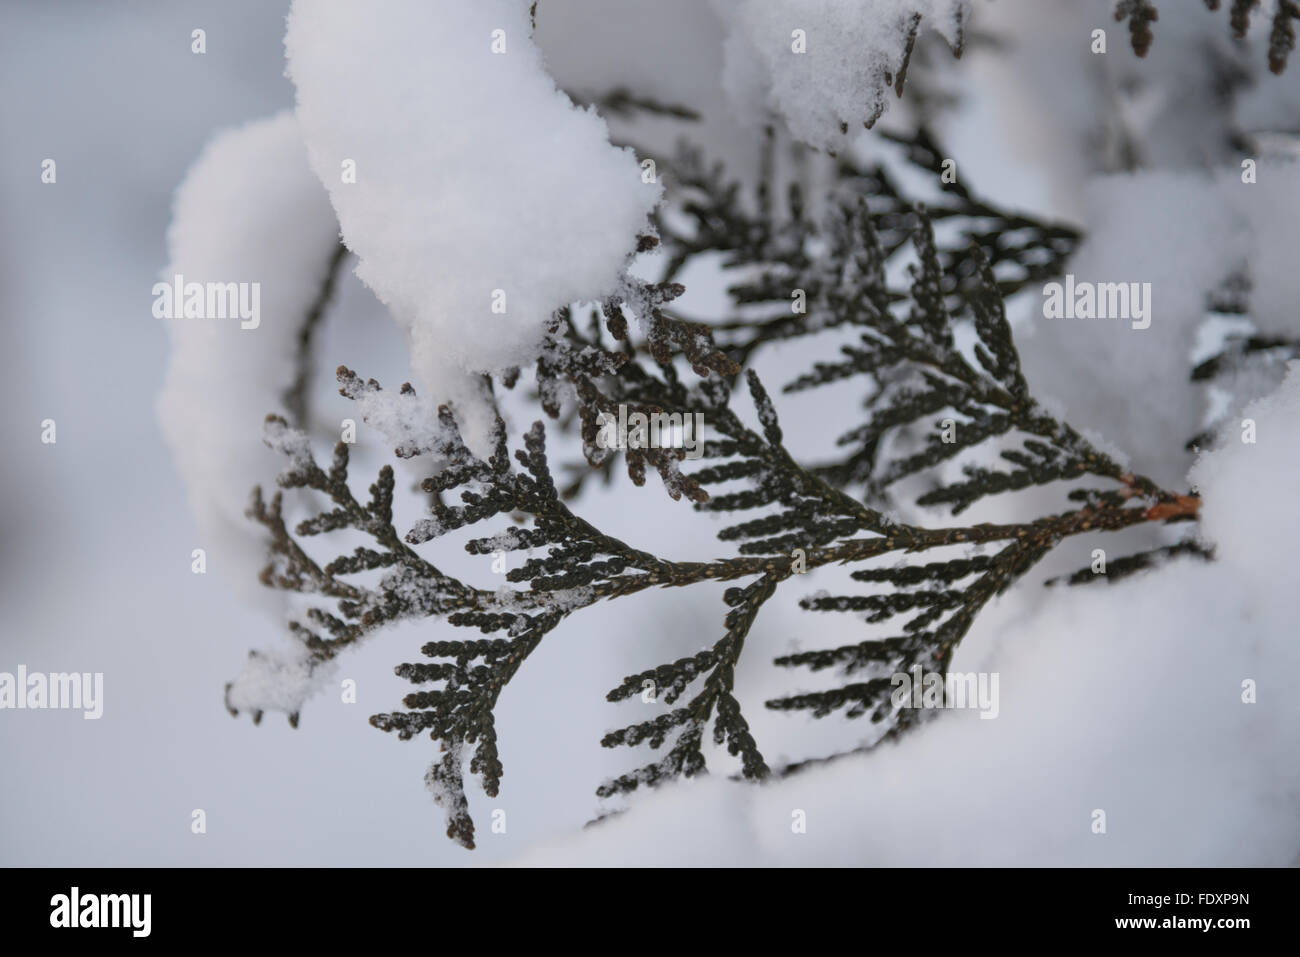 During the night snow accumulated on everything, including the needles of this Northern White Cedar (Thuja occidentalis). Stock Photo